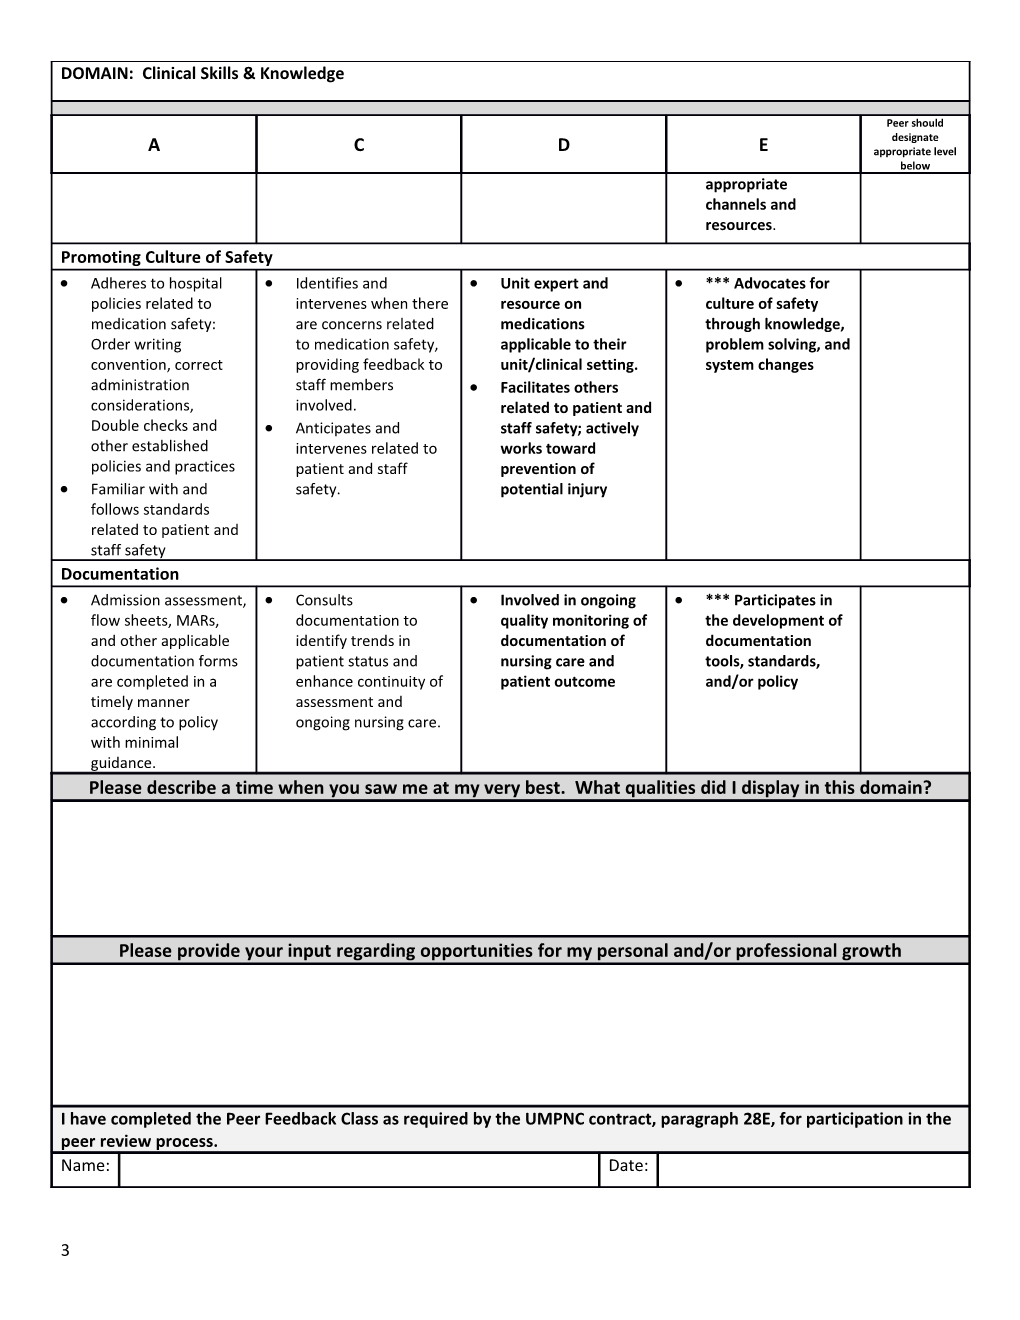 Framework RN Peer Input Tool for Annual Evaluation: Clinical Skills and Knowledge